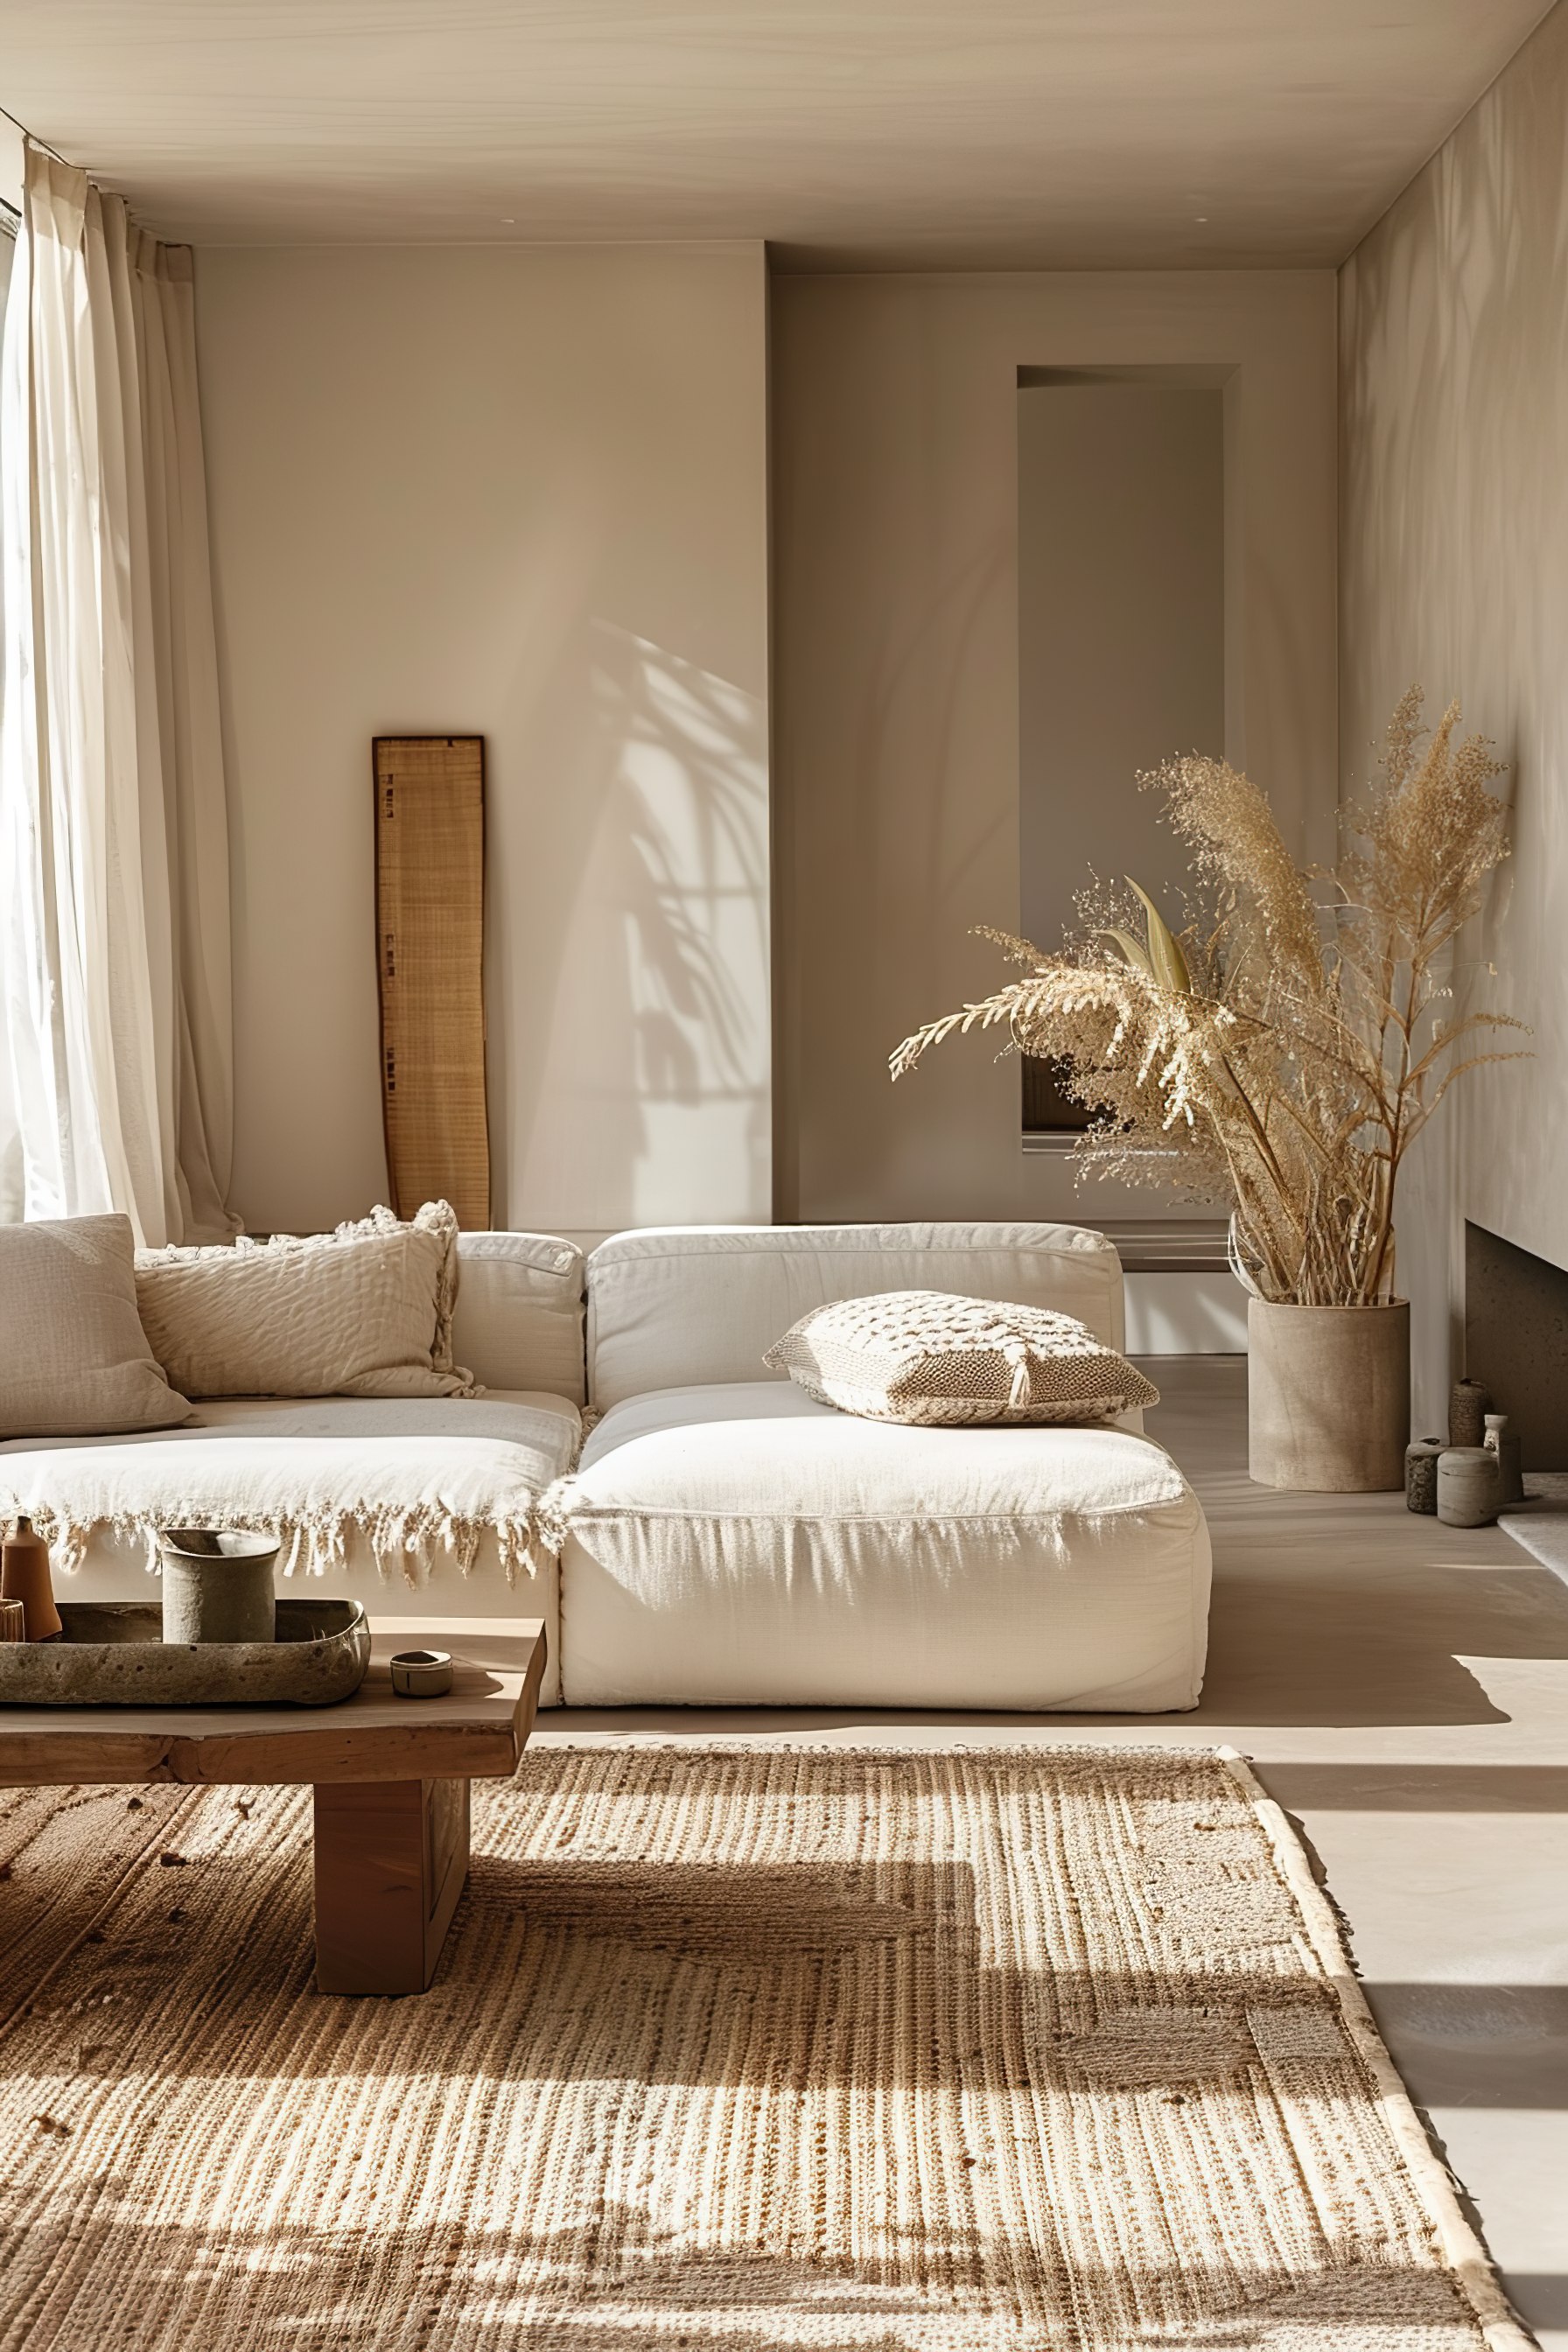 A serene living room bathed in natural light, featuring a neutral color palette and cozy modern furnishings.